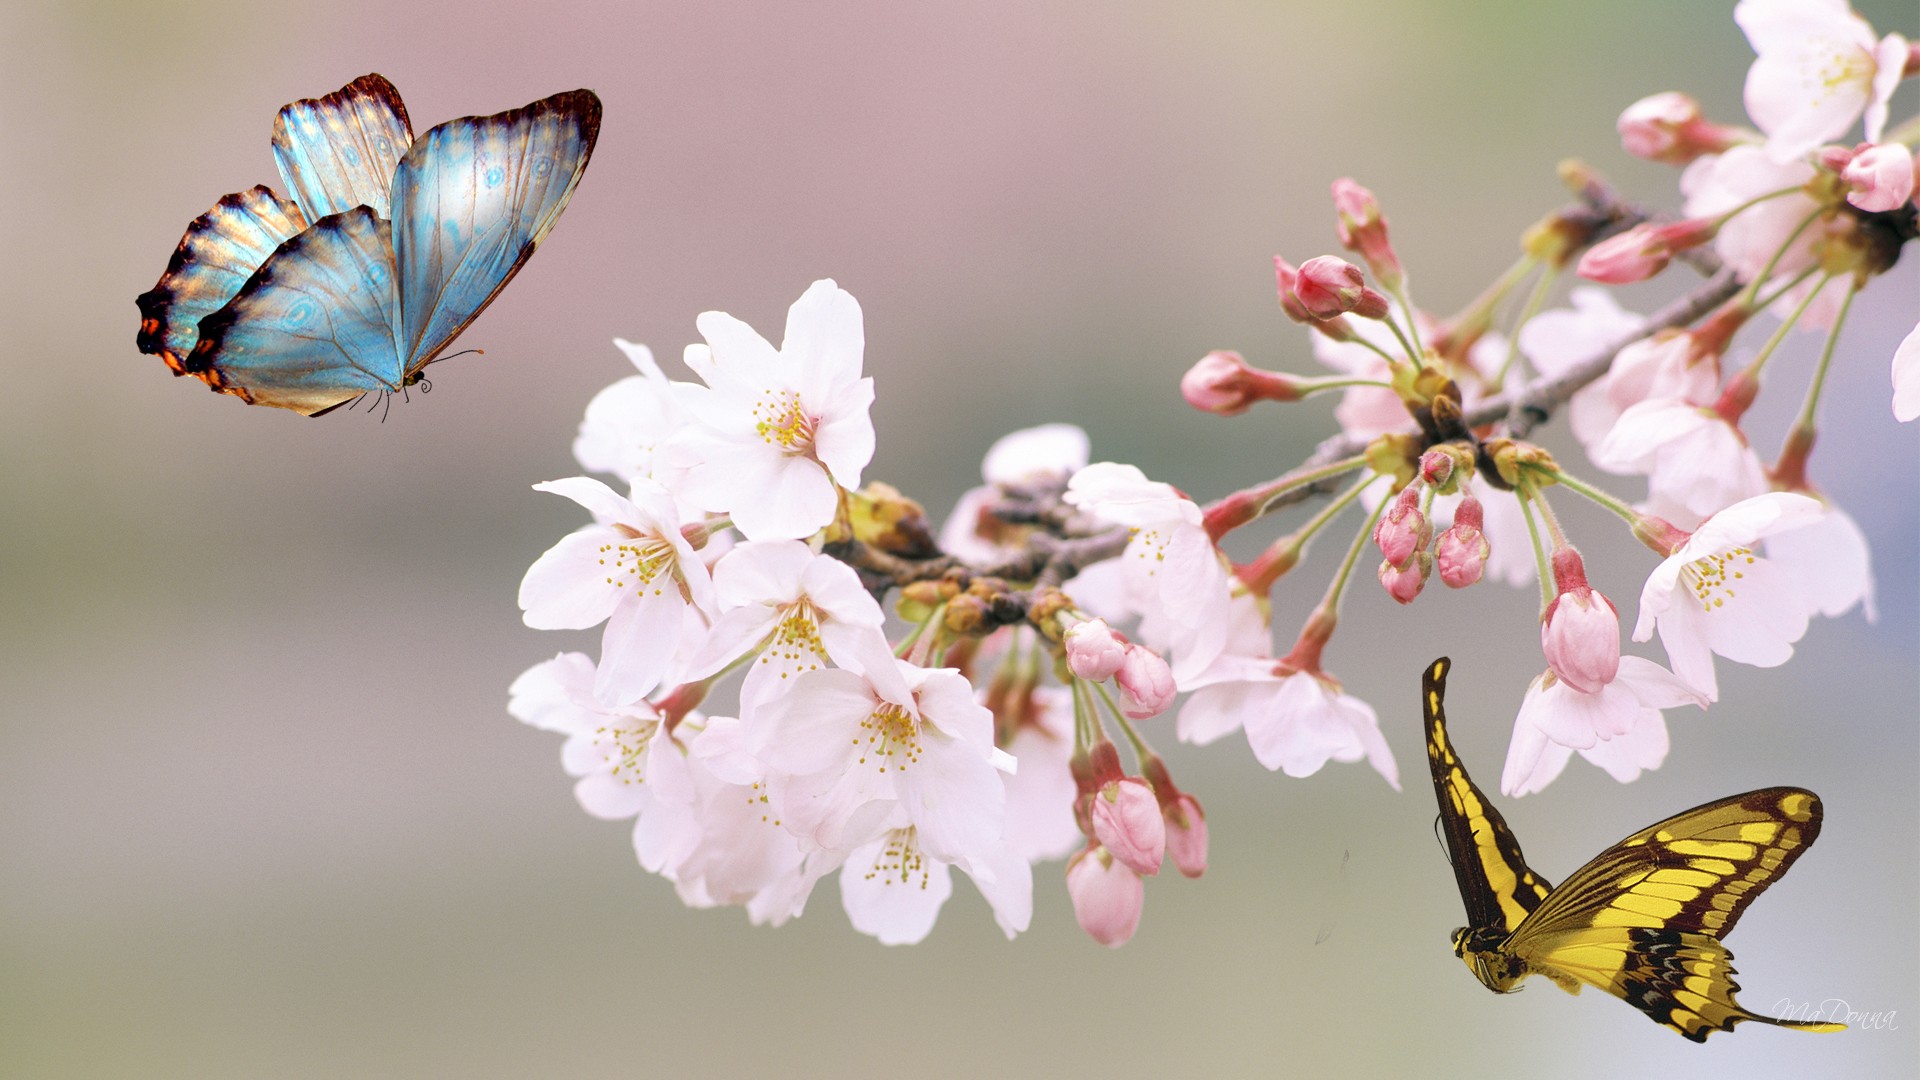 Butterfly On A Cherry Blossom Tree - HD Wallpaper 